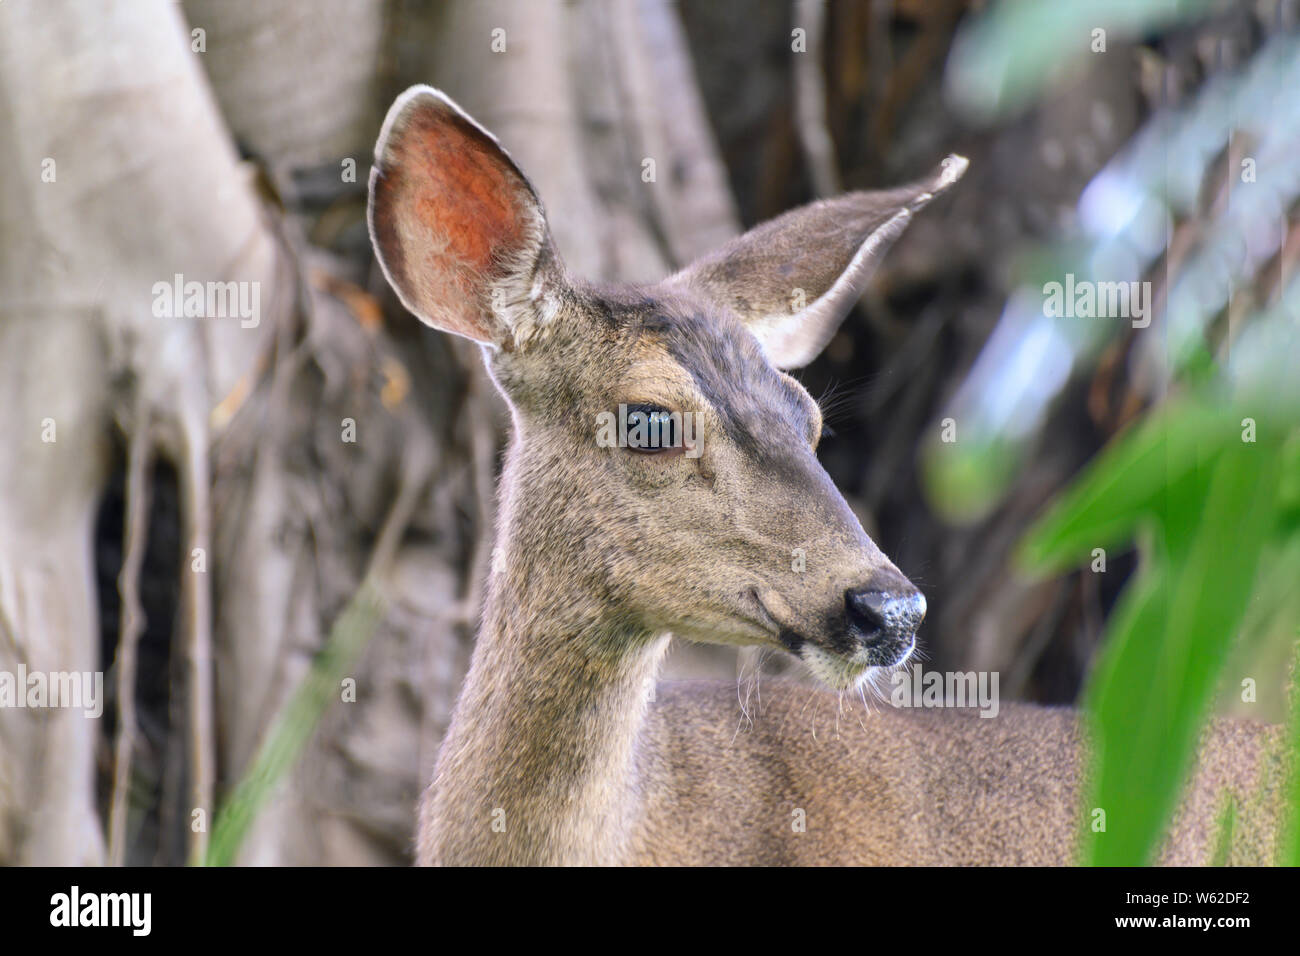 CLoseup portrait of Female mule deer (Odocoileus hemionus), looking to the side, named for its ears, which are large like those of the mule. Stock Photo